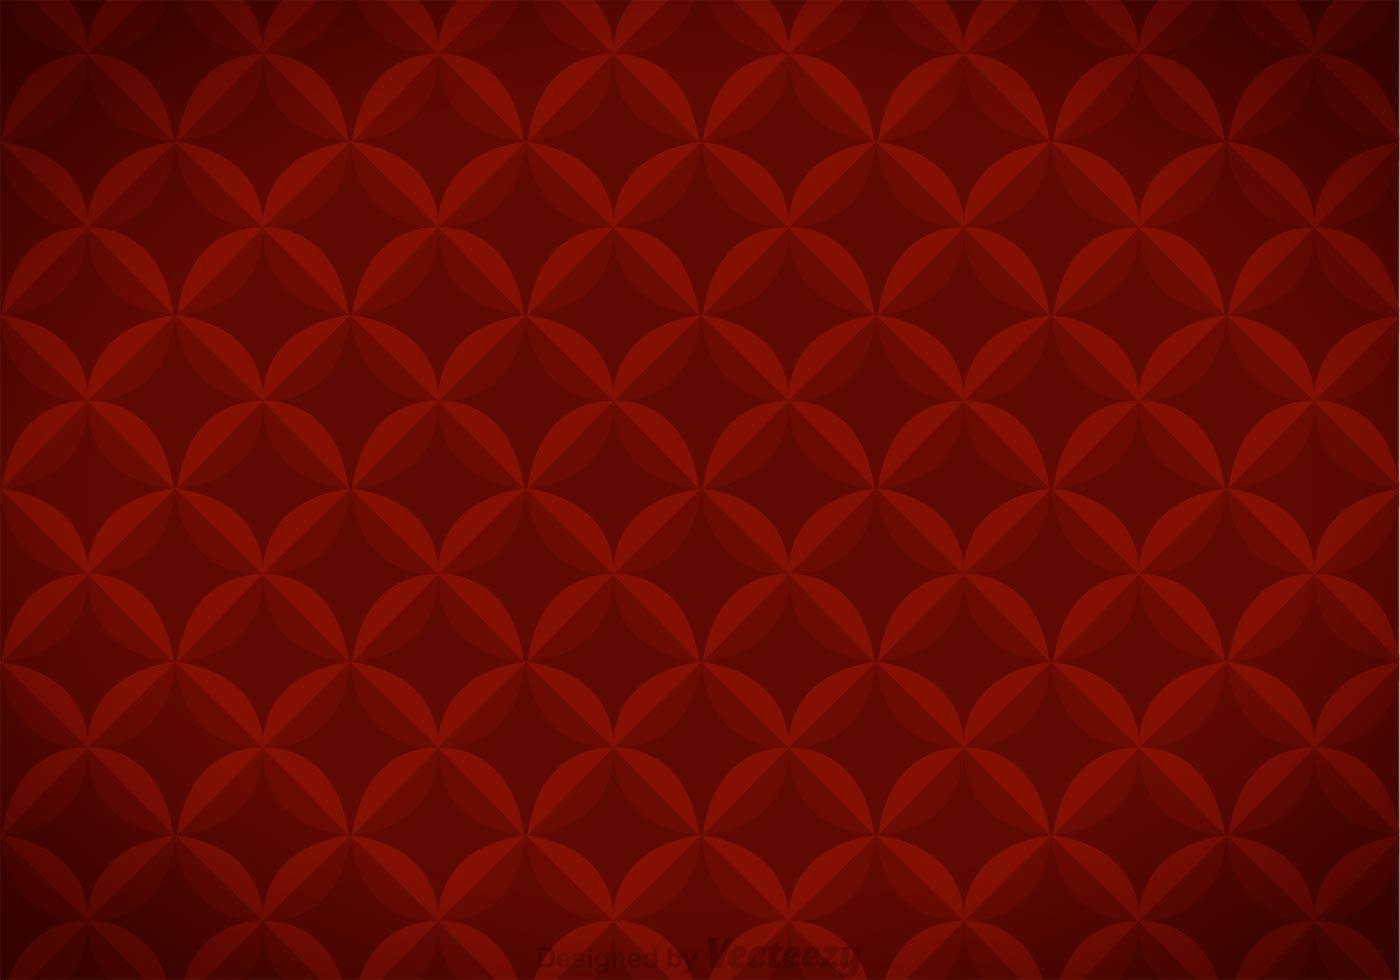 Maroon Square Background Vector Free Vector Art, Stock